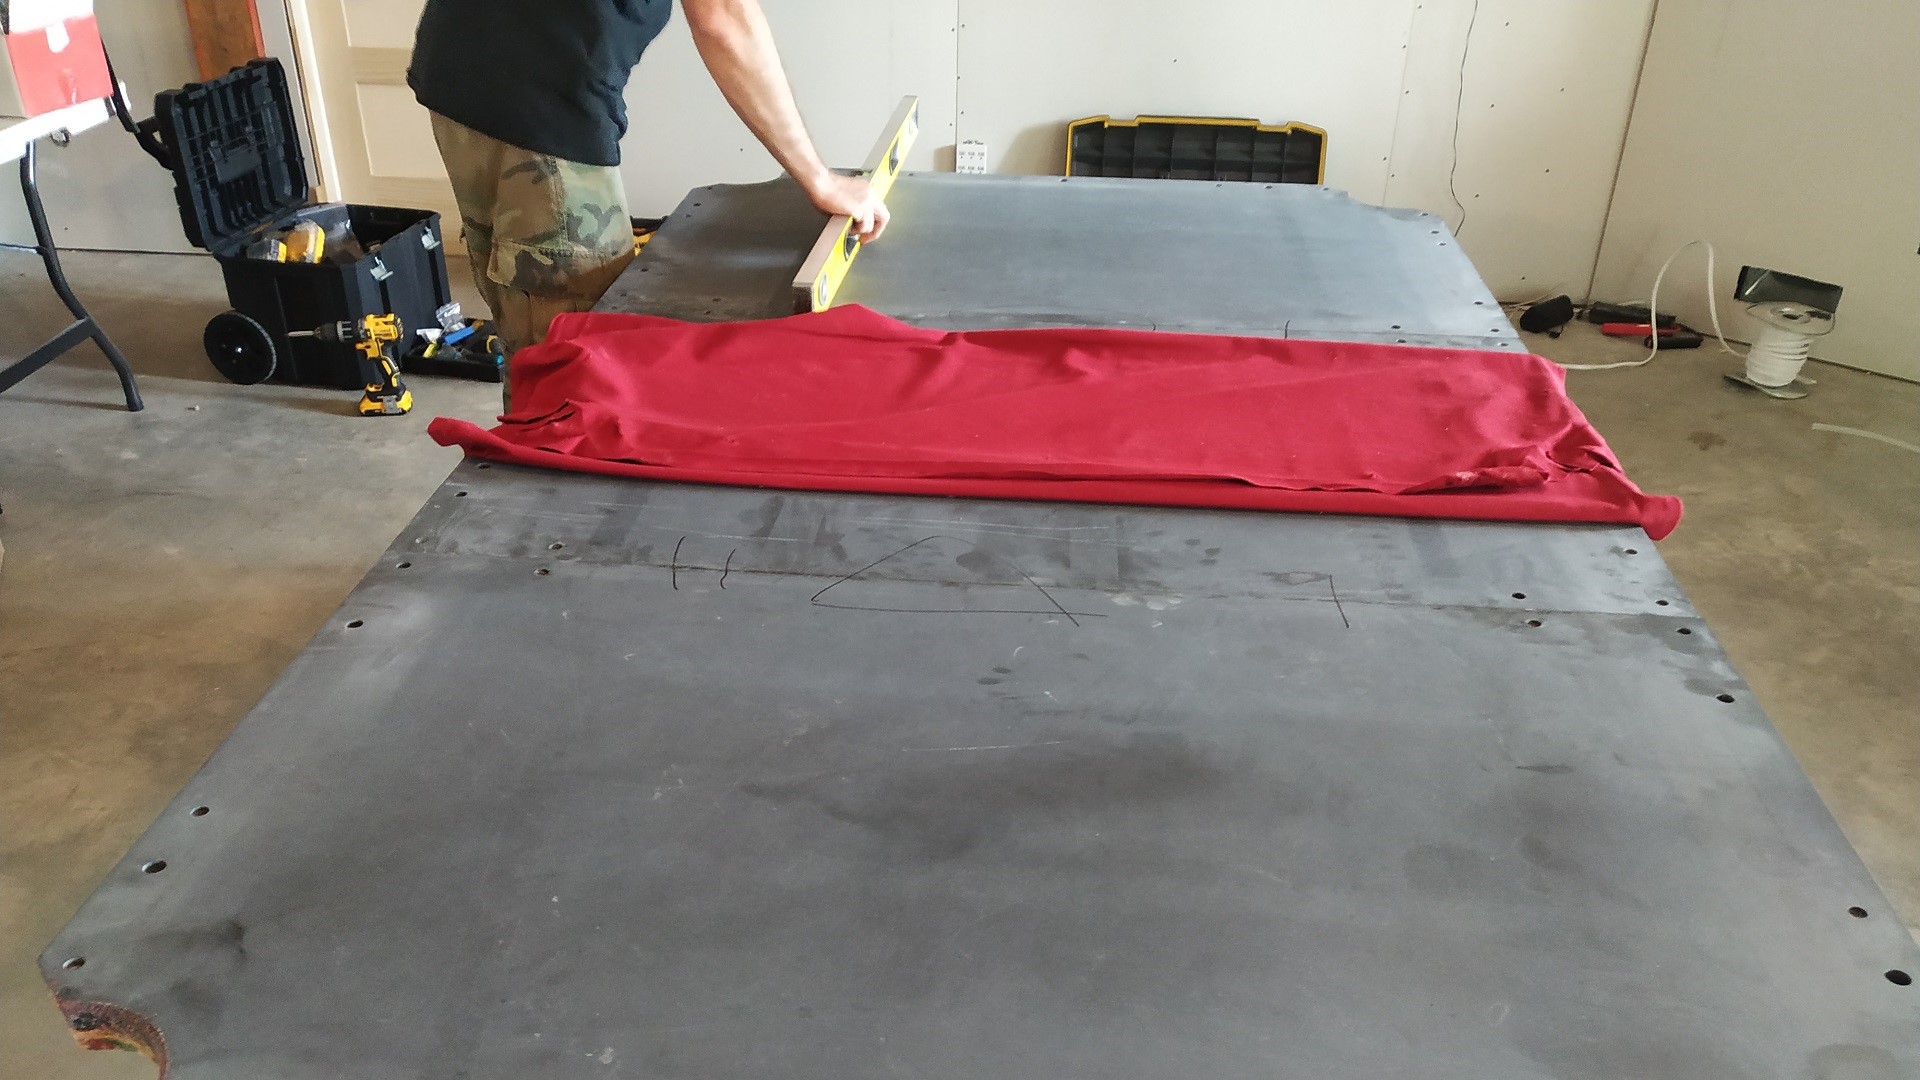 How to move a billiard table